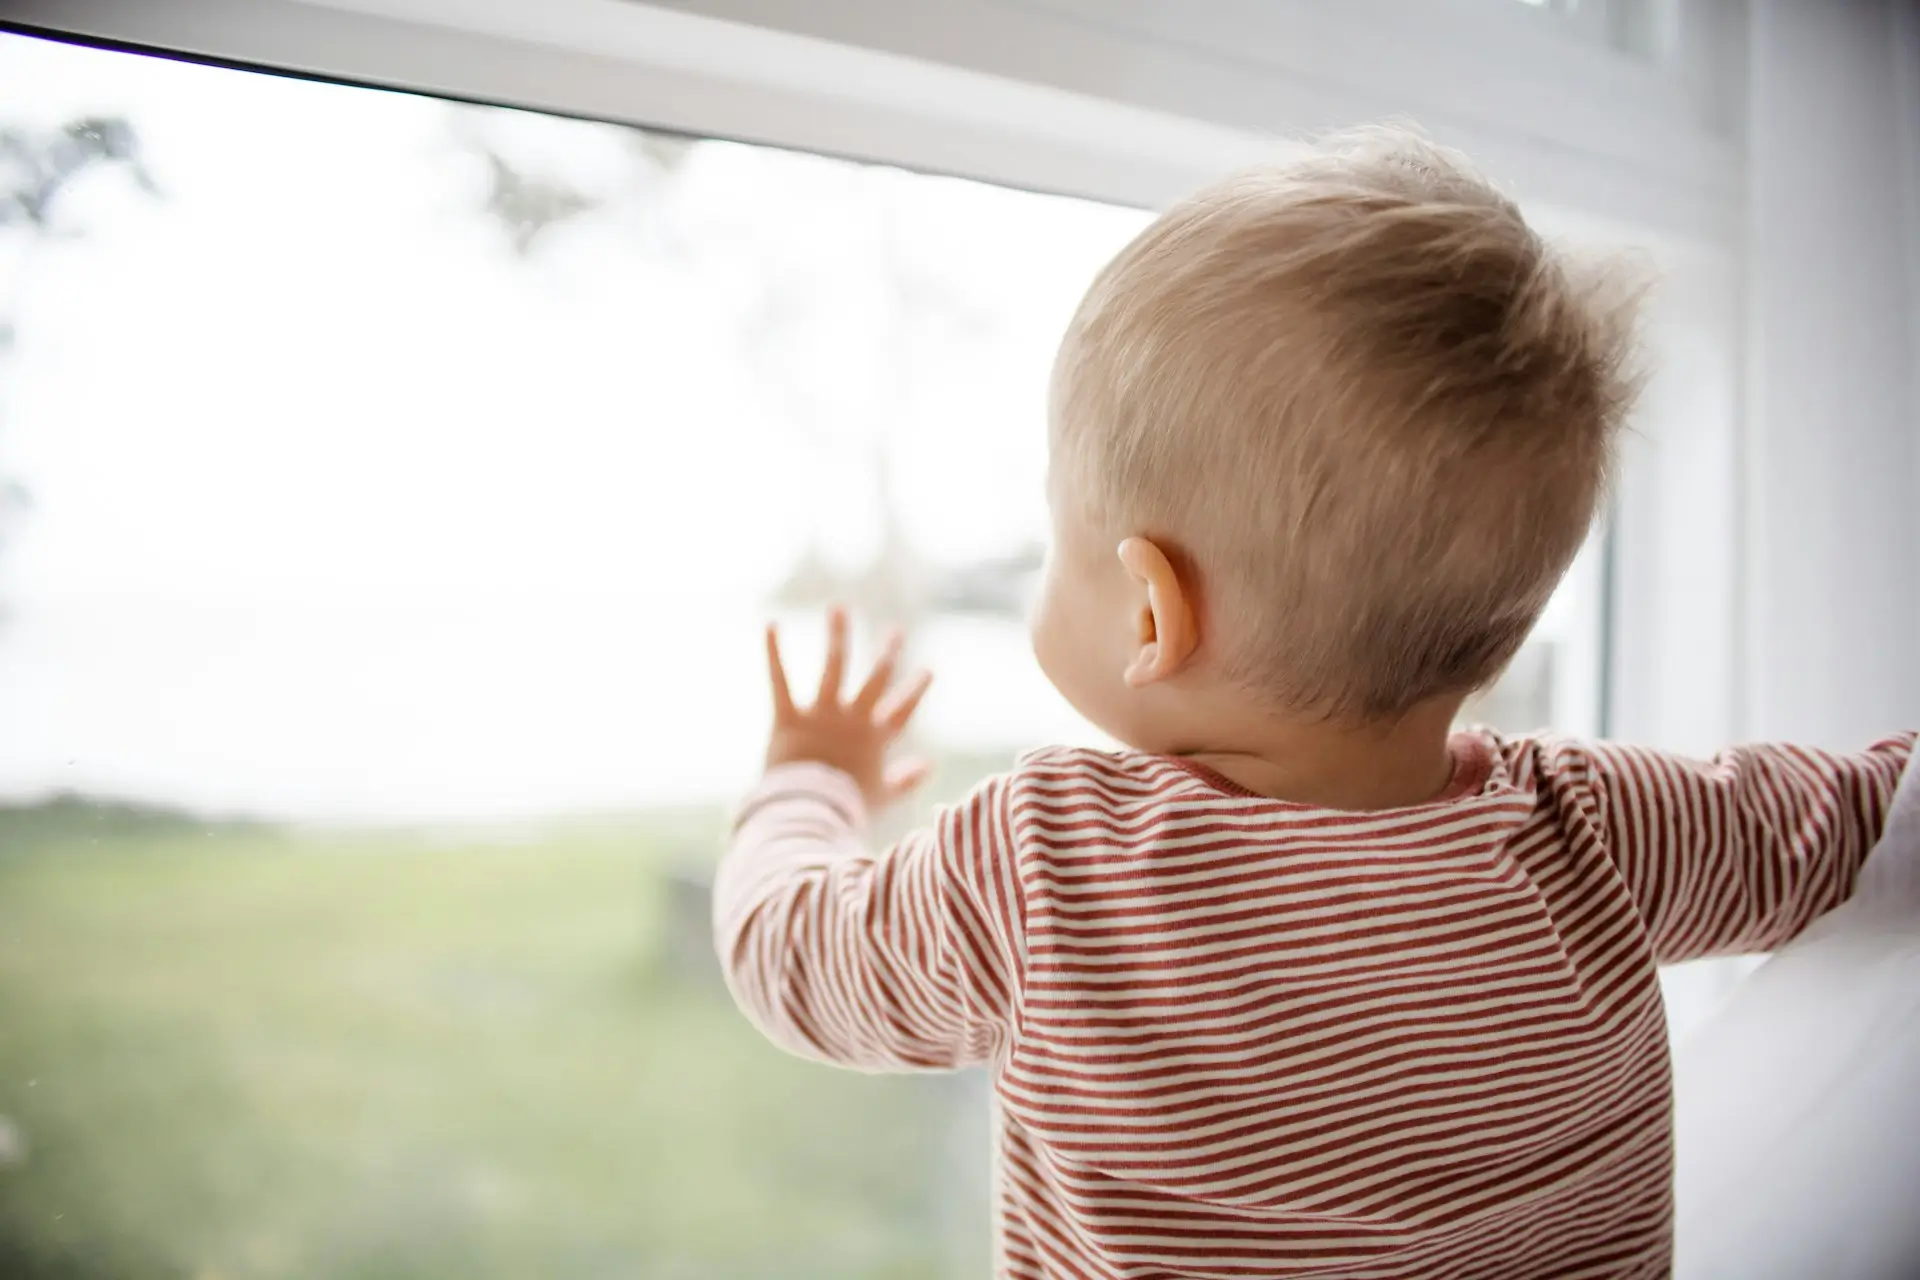 a child looking out the window cared for by staff sourced through children's services staffing agency